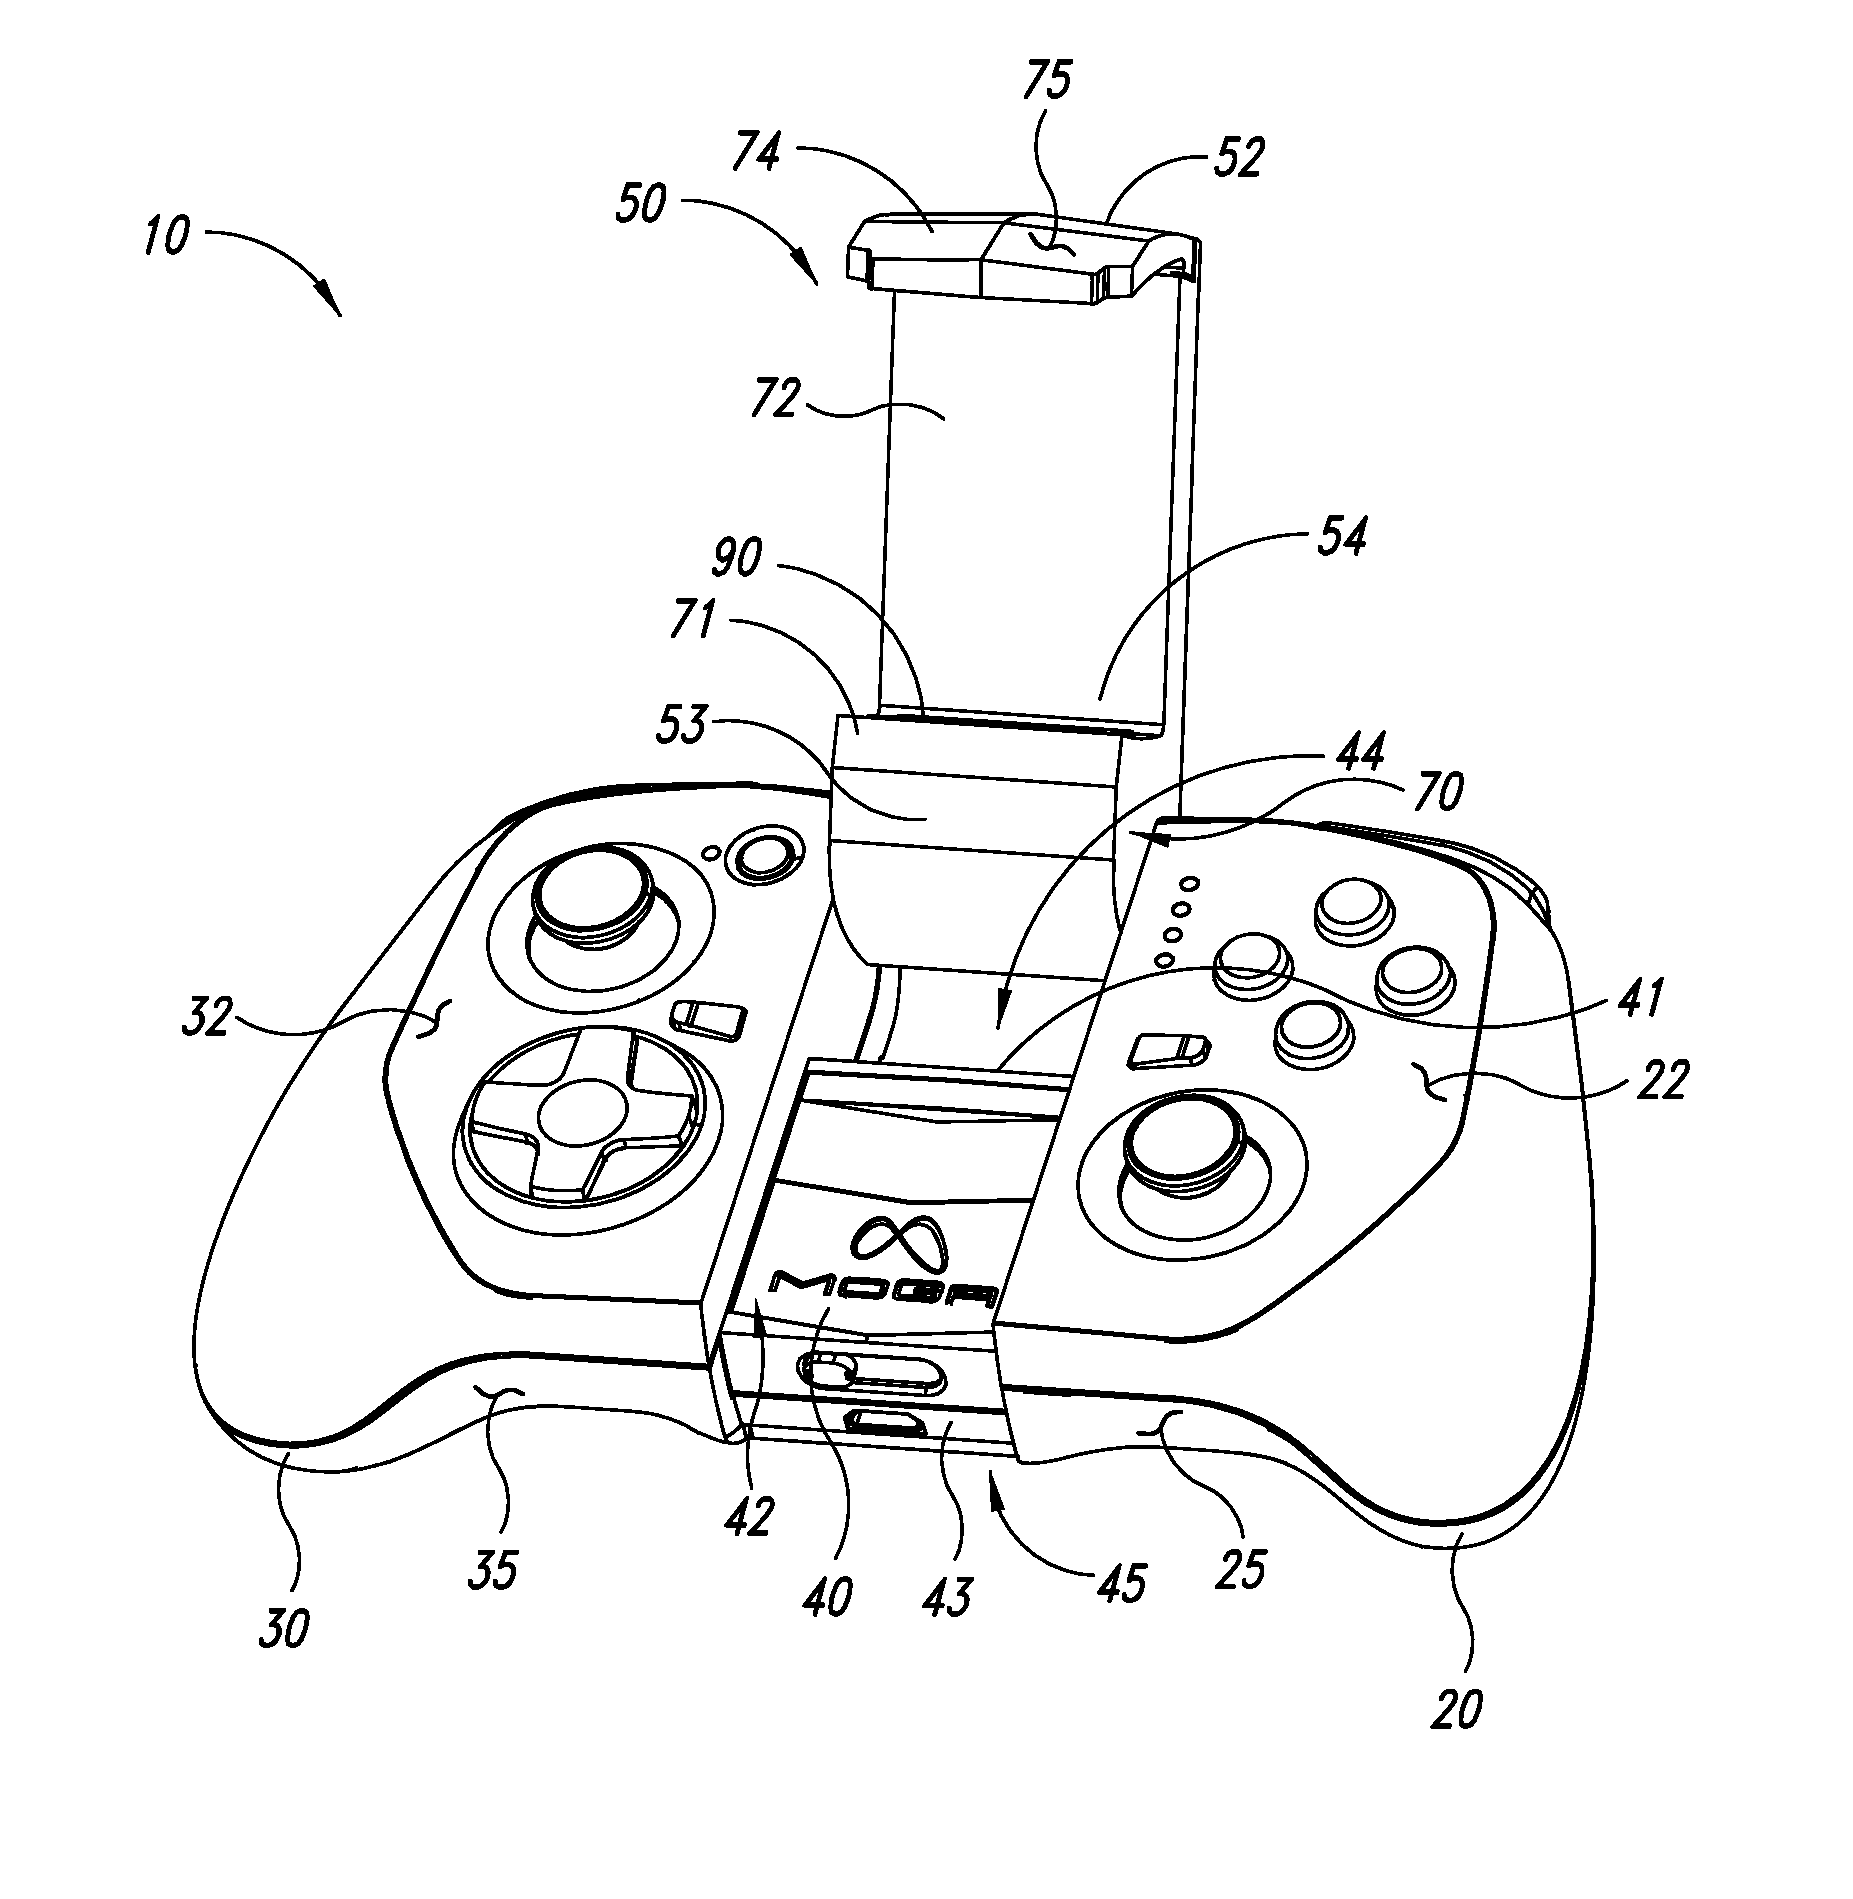 Controllers for use with mobile devices